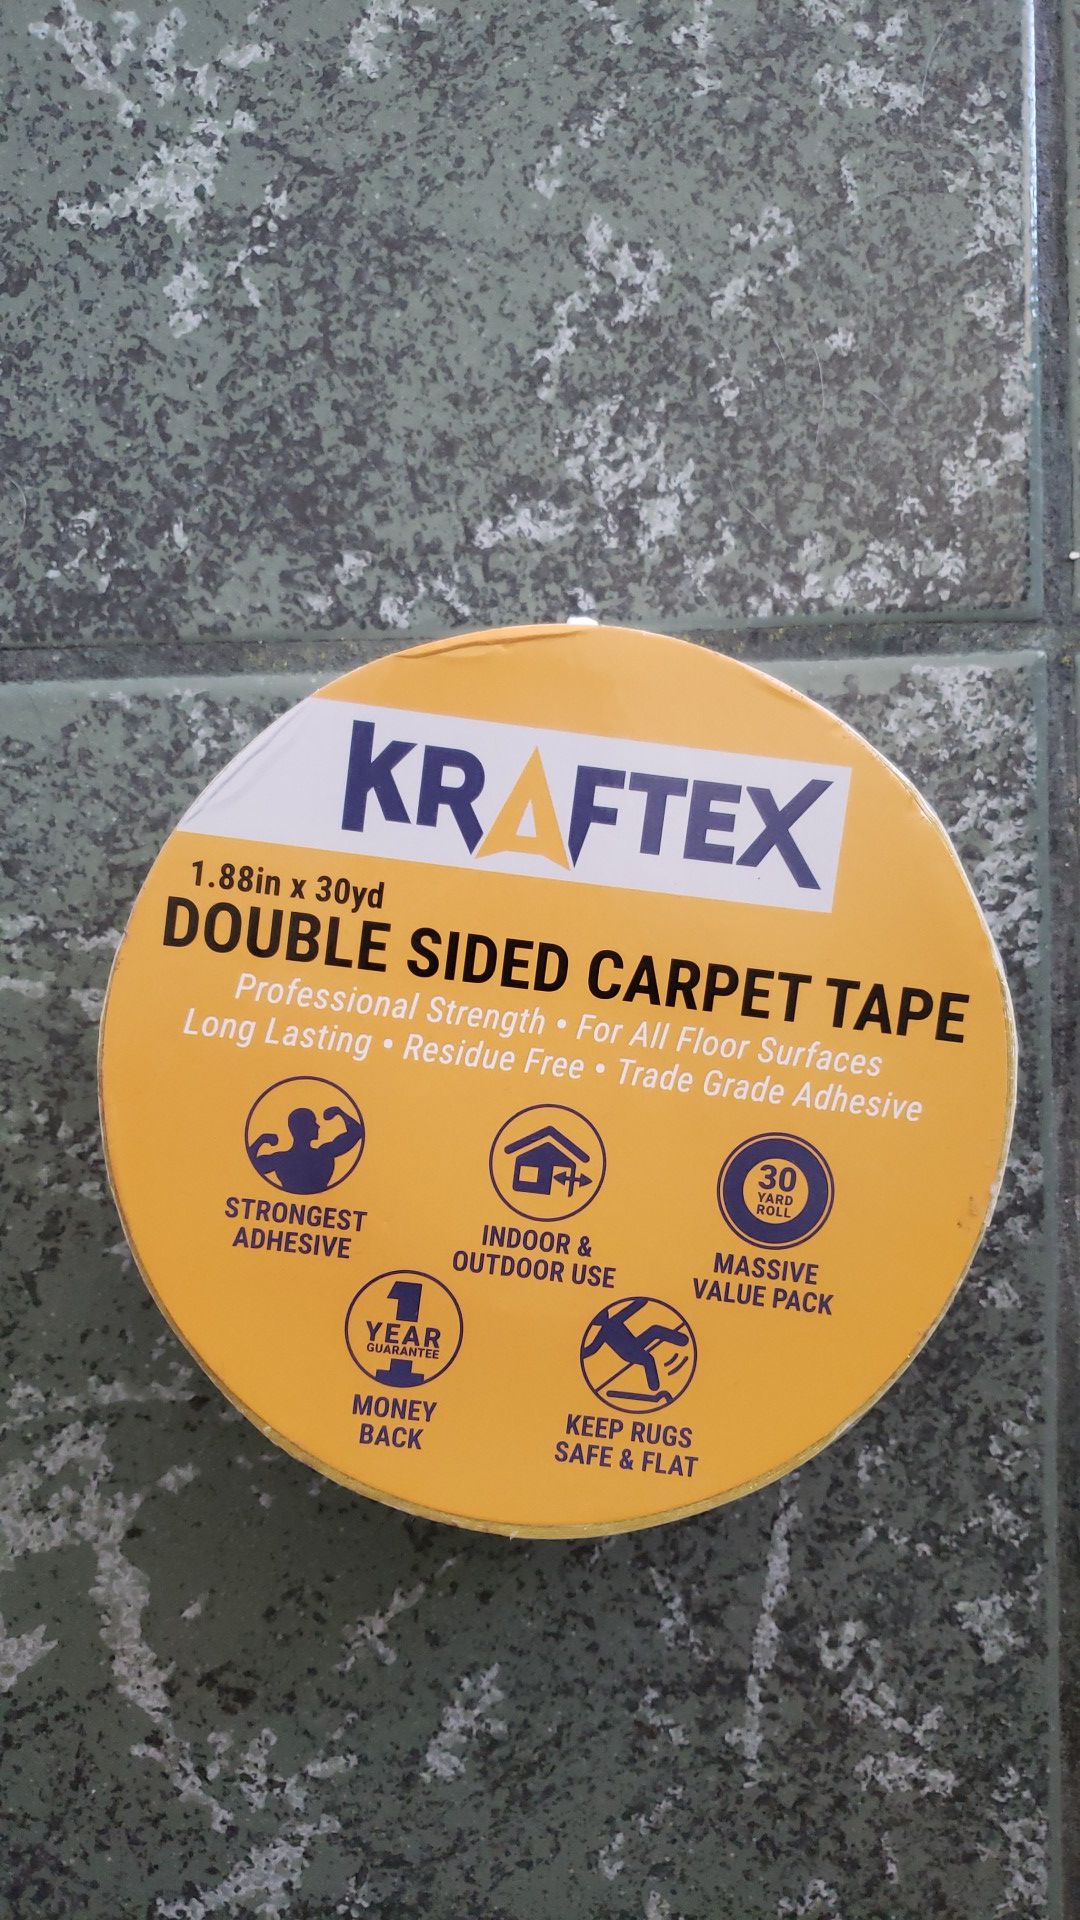 Kraftex double sided carpet tape BRAND NEW